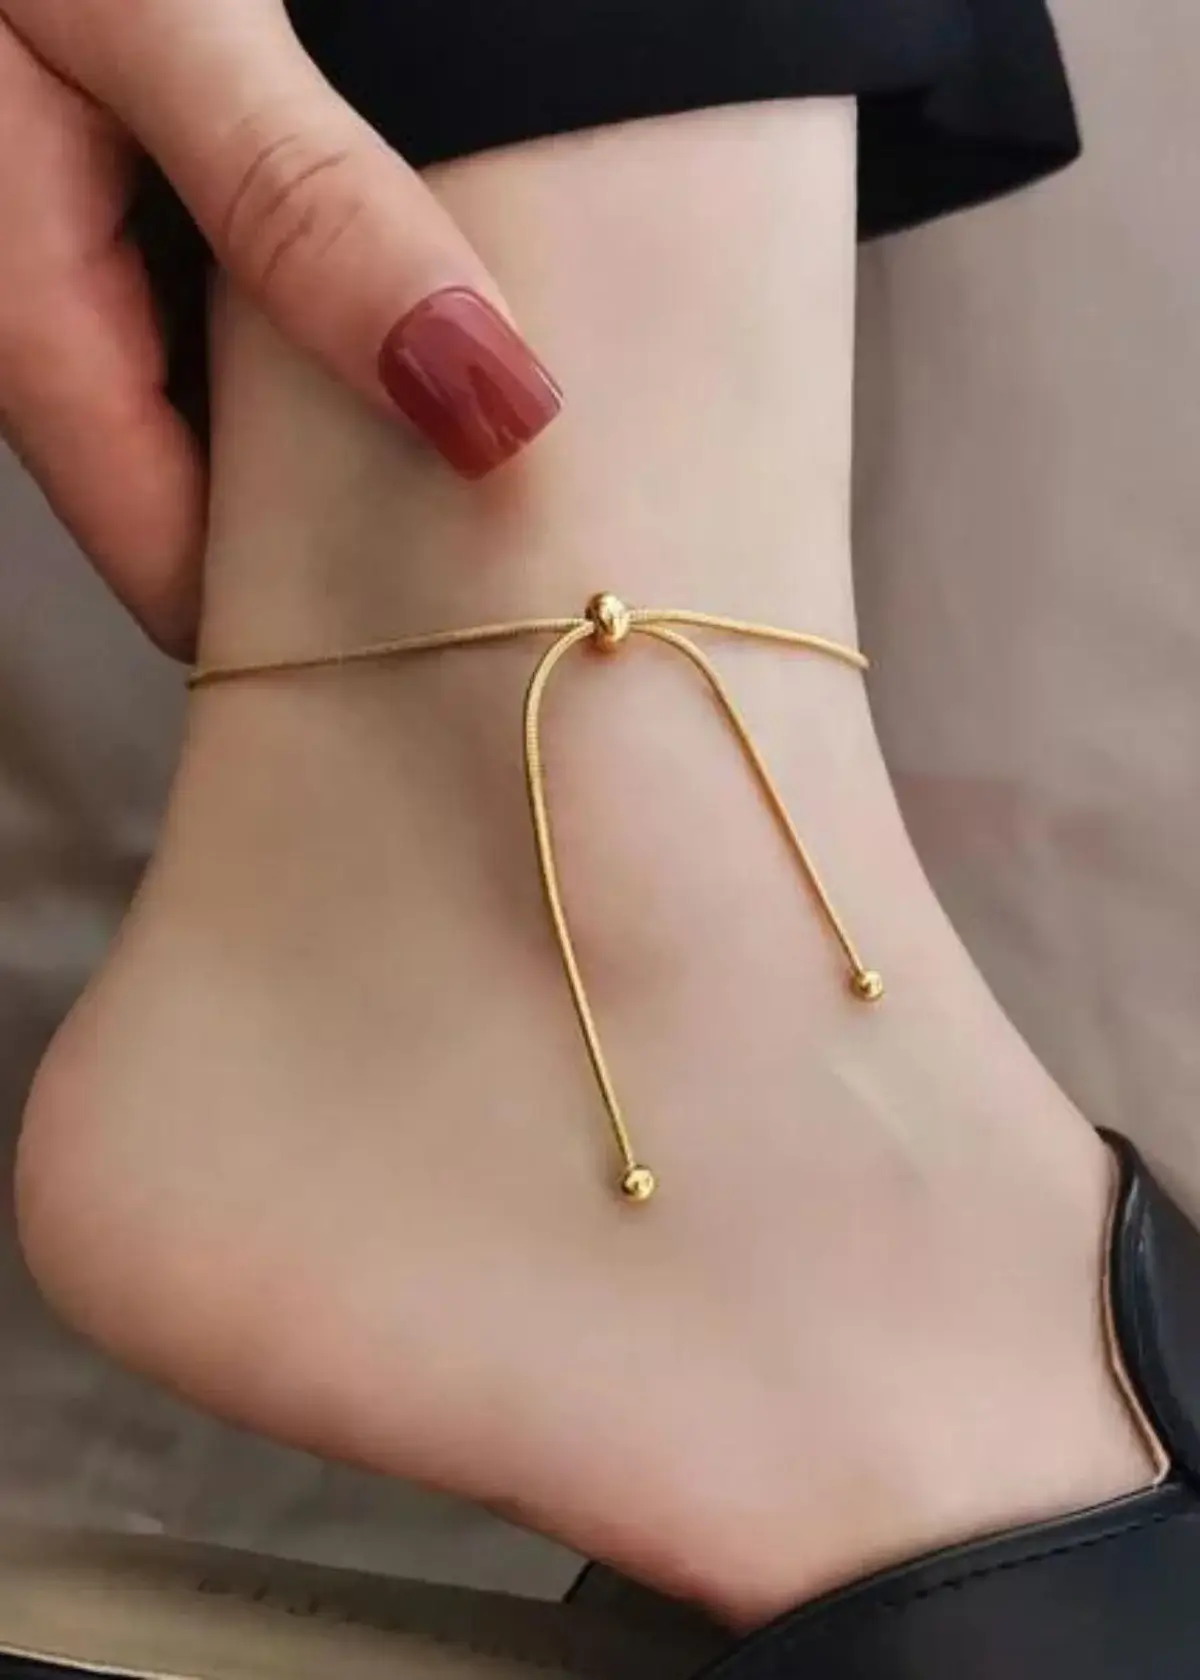 How to choose the right gold ankle bracelet?